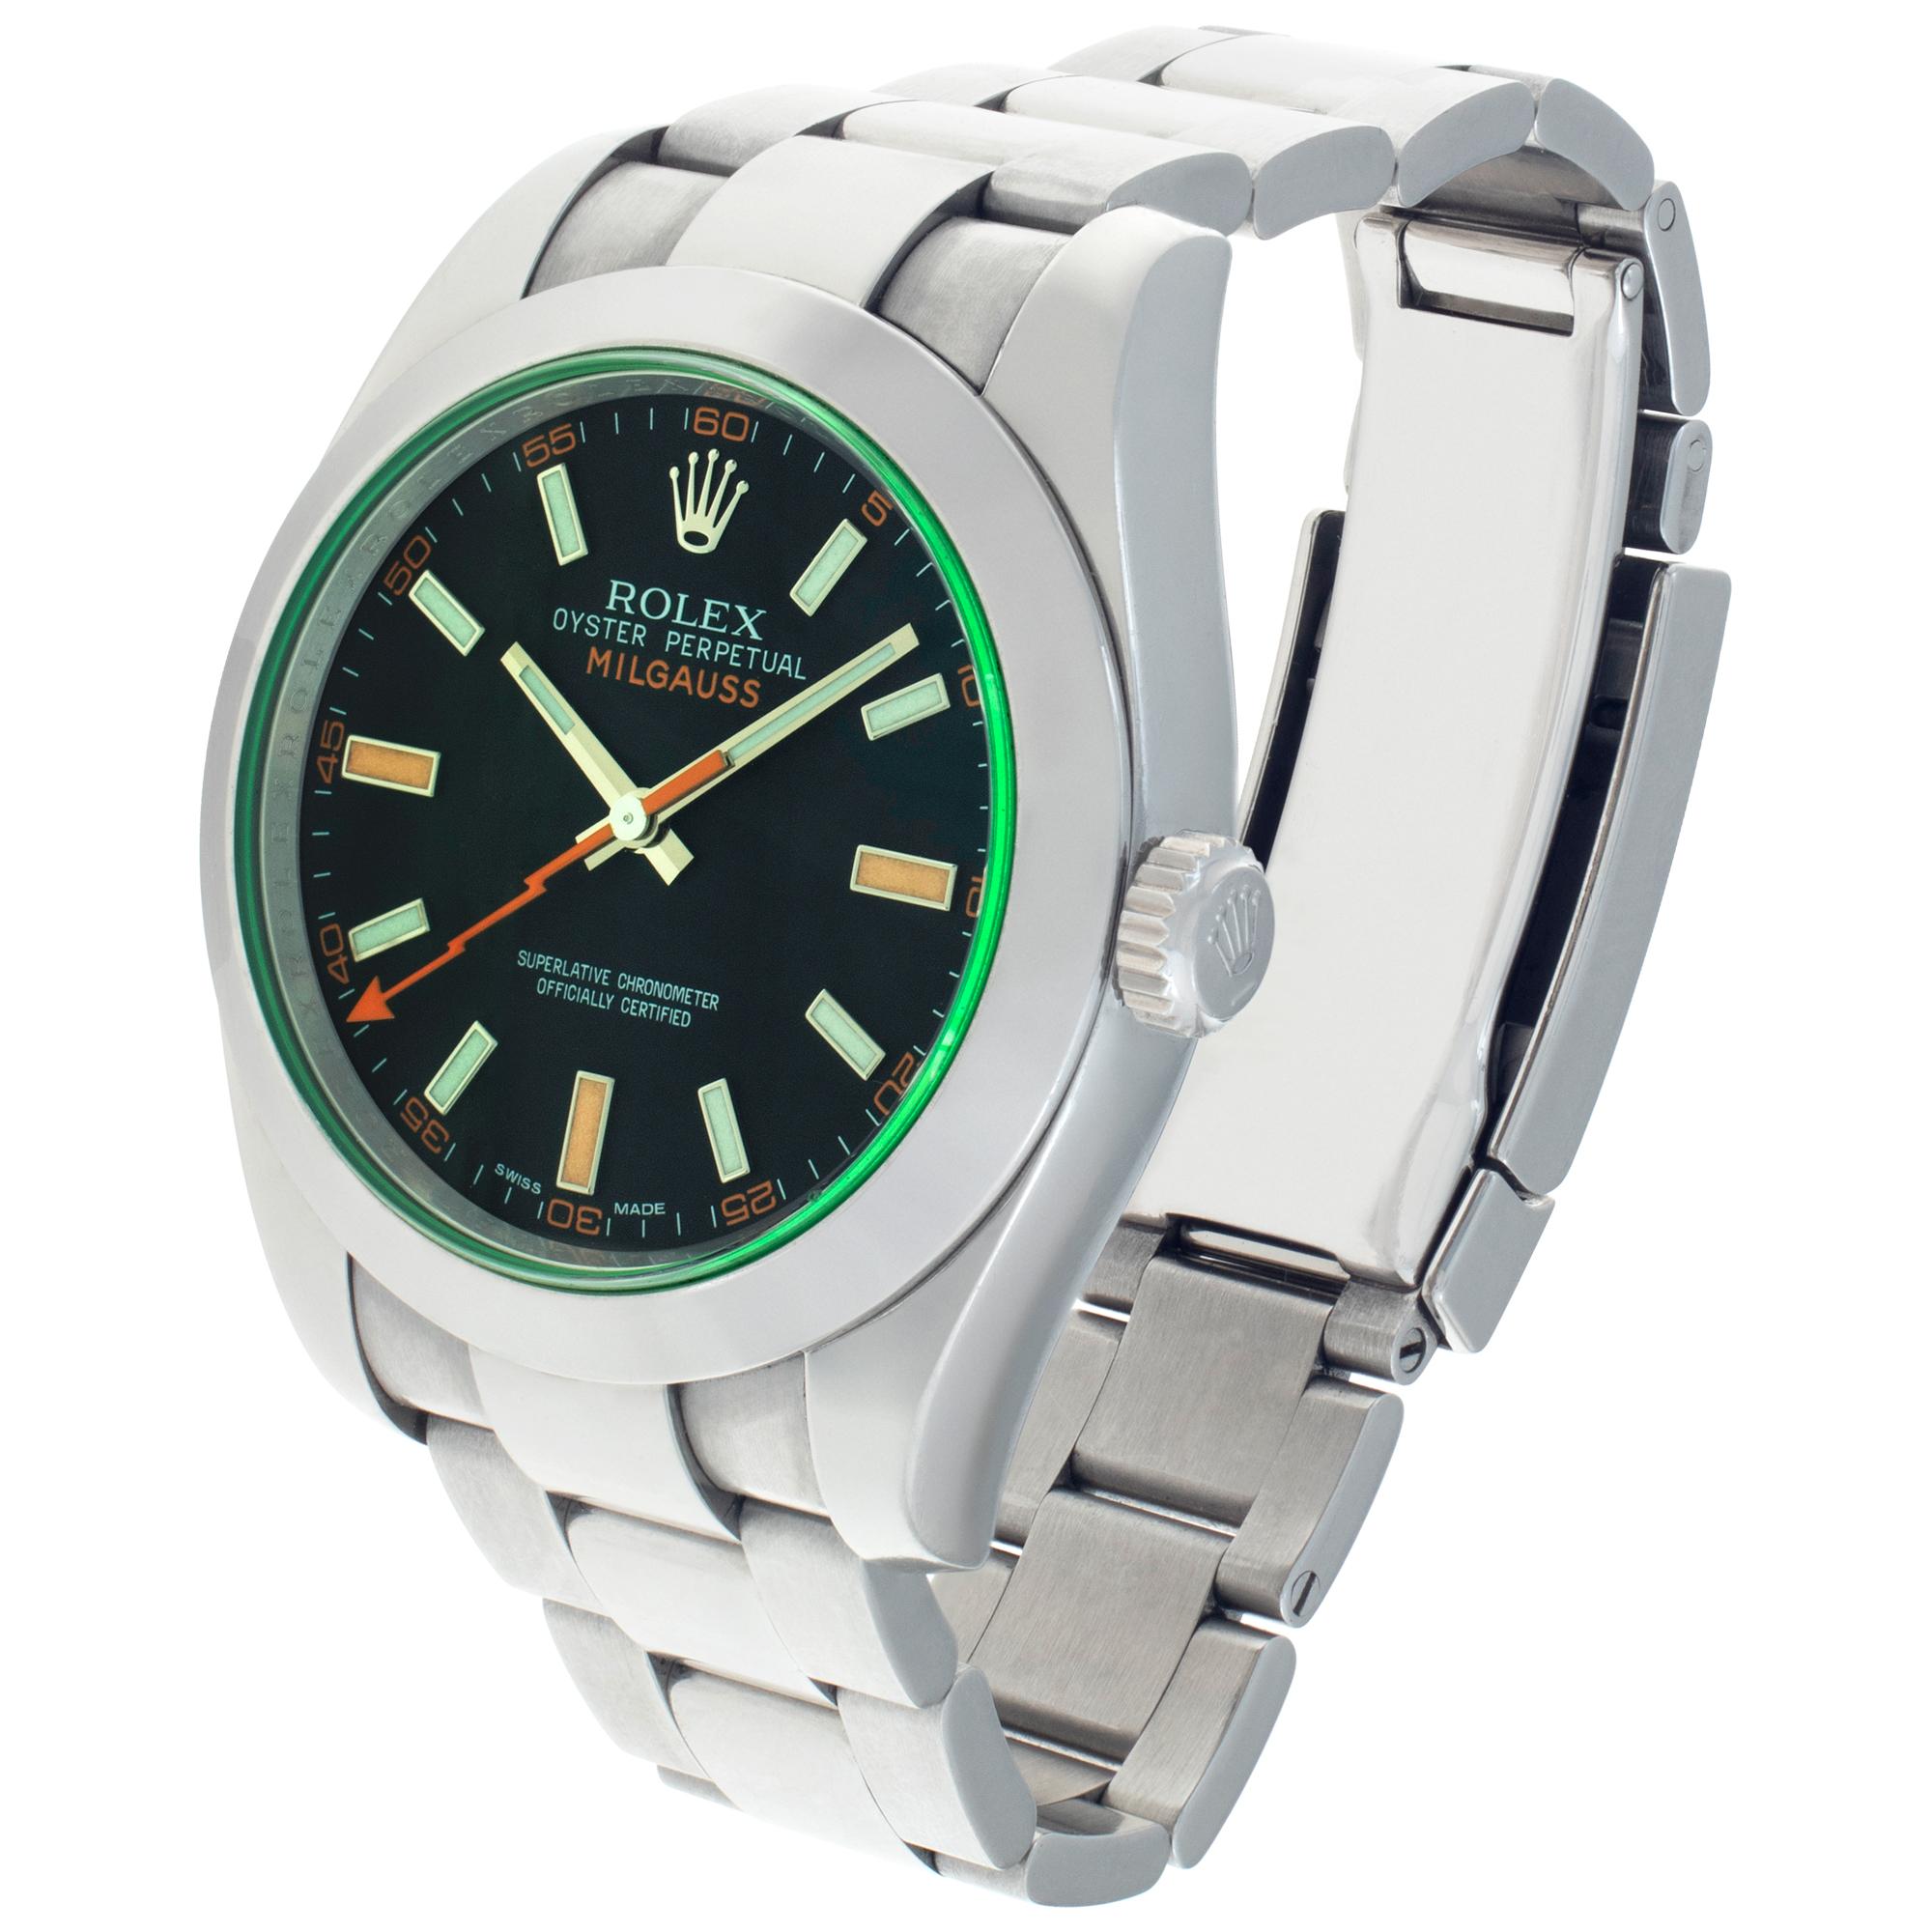 Rolex Milgauss in stainless steel with black dial and green crystal. Auto. 40 mm case size. **Bank wire only at this price** Ref 116400. Circa 2010. Fine Pre-owned Rolex Watch. Certified preowned Sport Rolex Milgauss 116400 watch is made out of